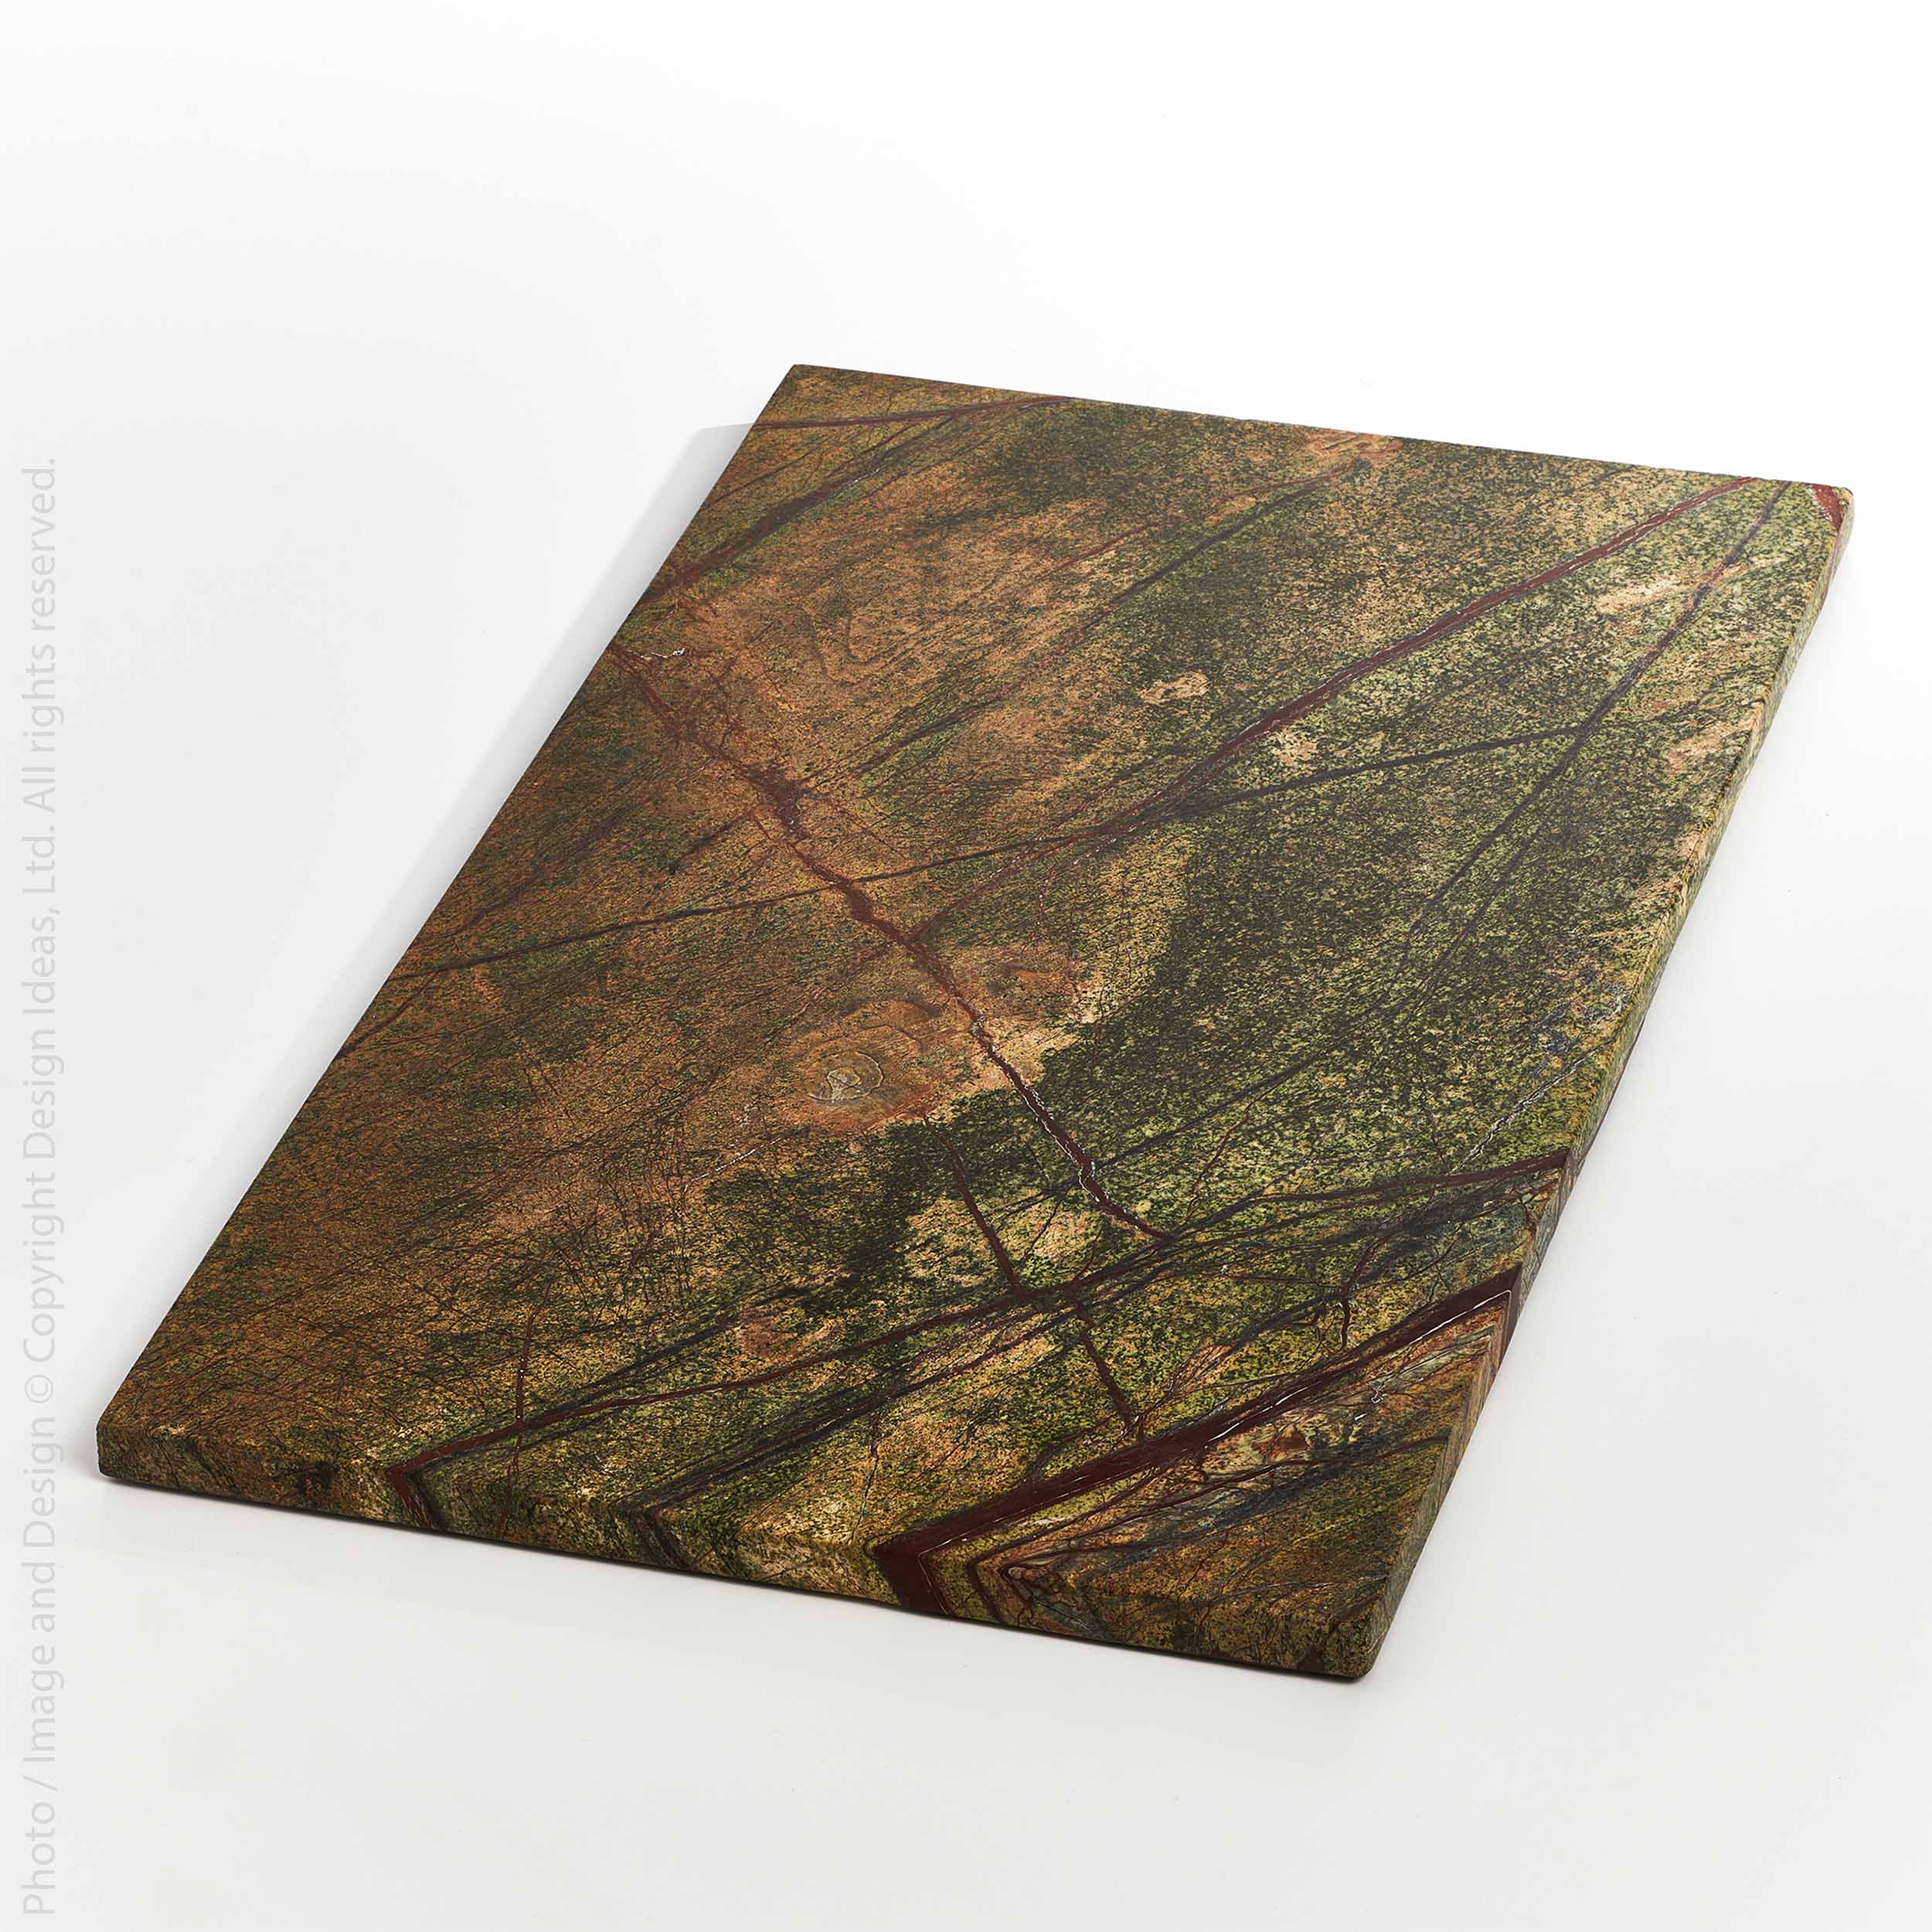 Piedmont™ marble cheese board (20 x 12 in.)